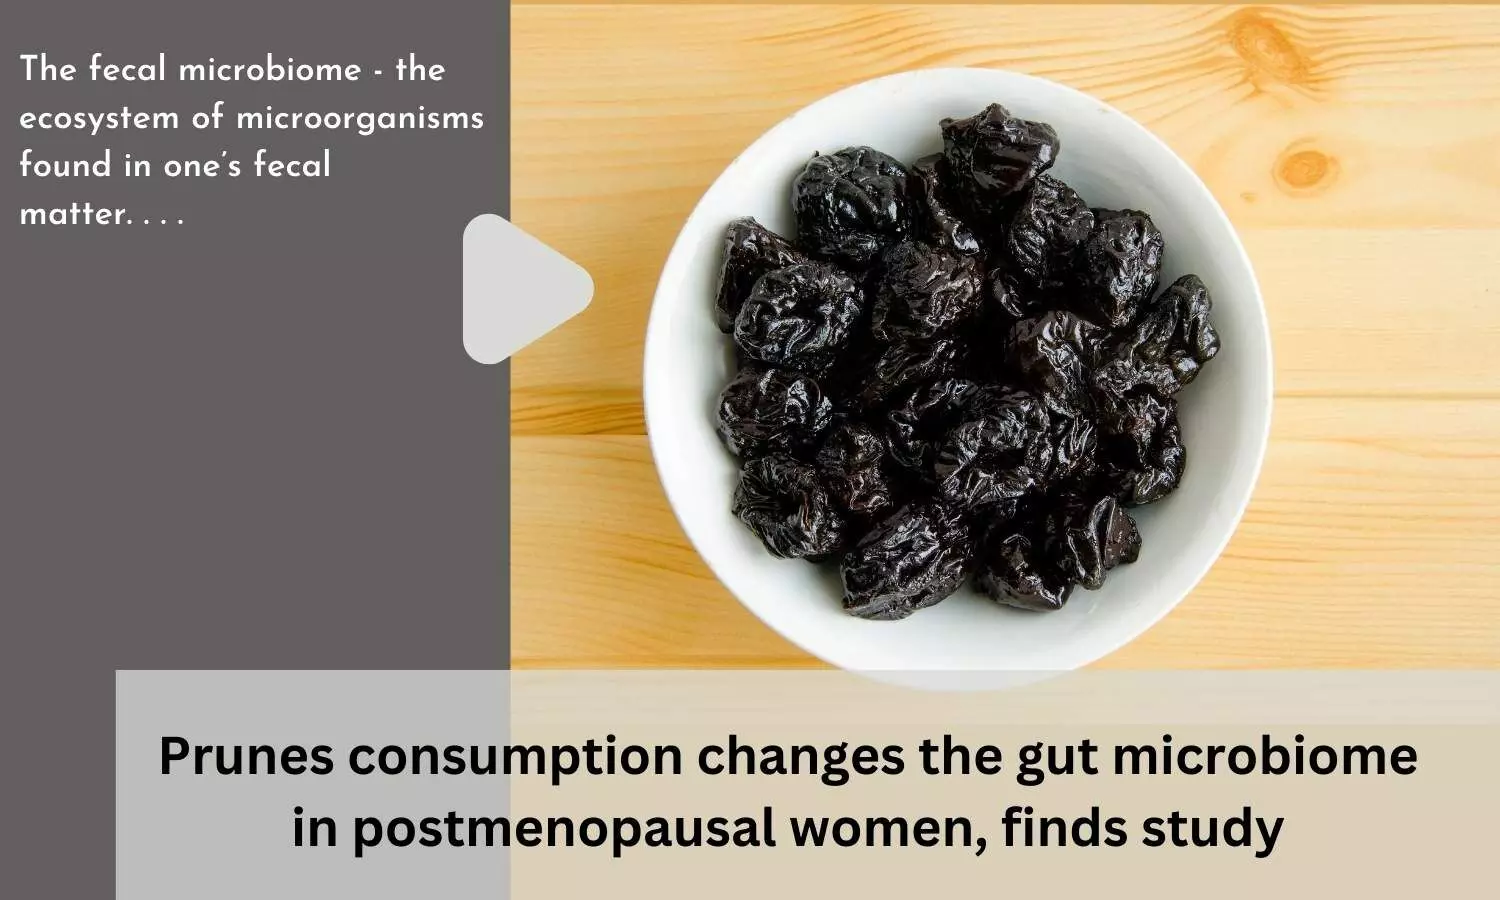 Prunes consumption changes the gut microbiome in postmenopausal women, finds study